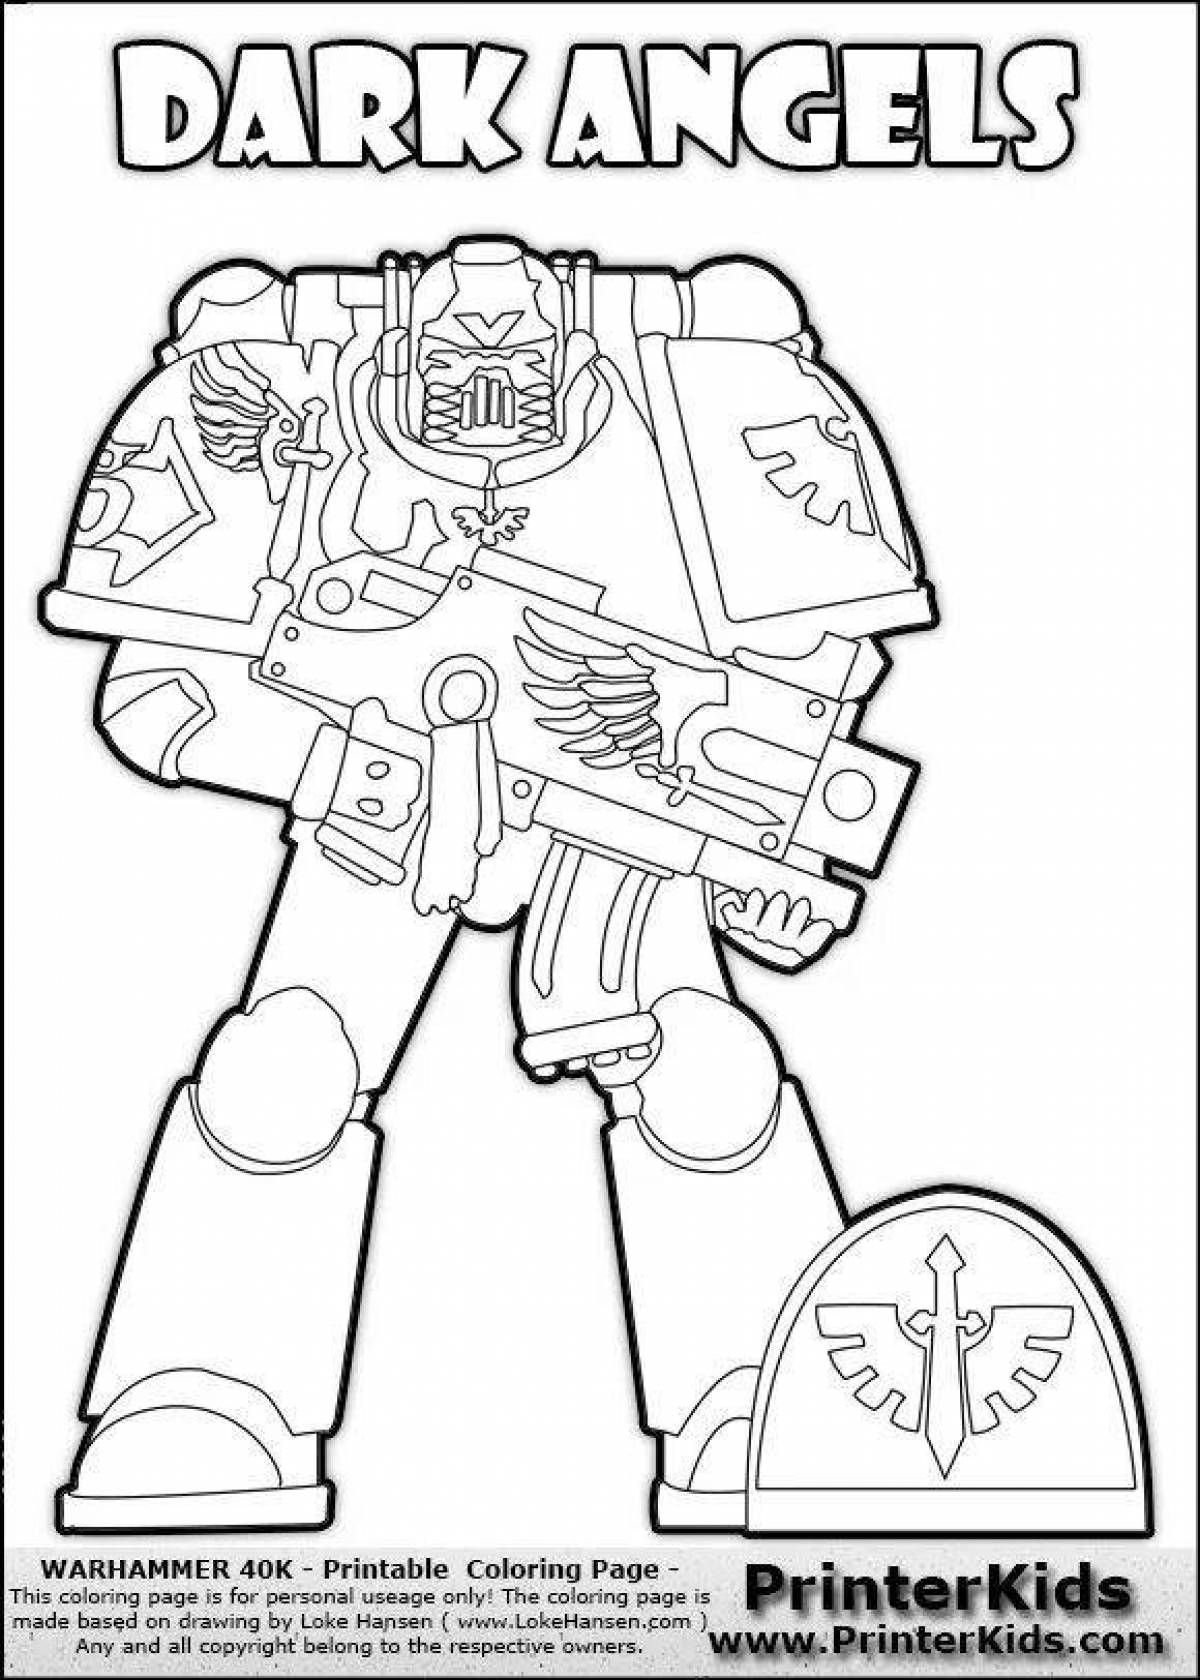 Exquisite warhammer coloring book